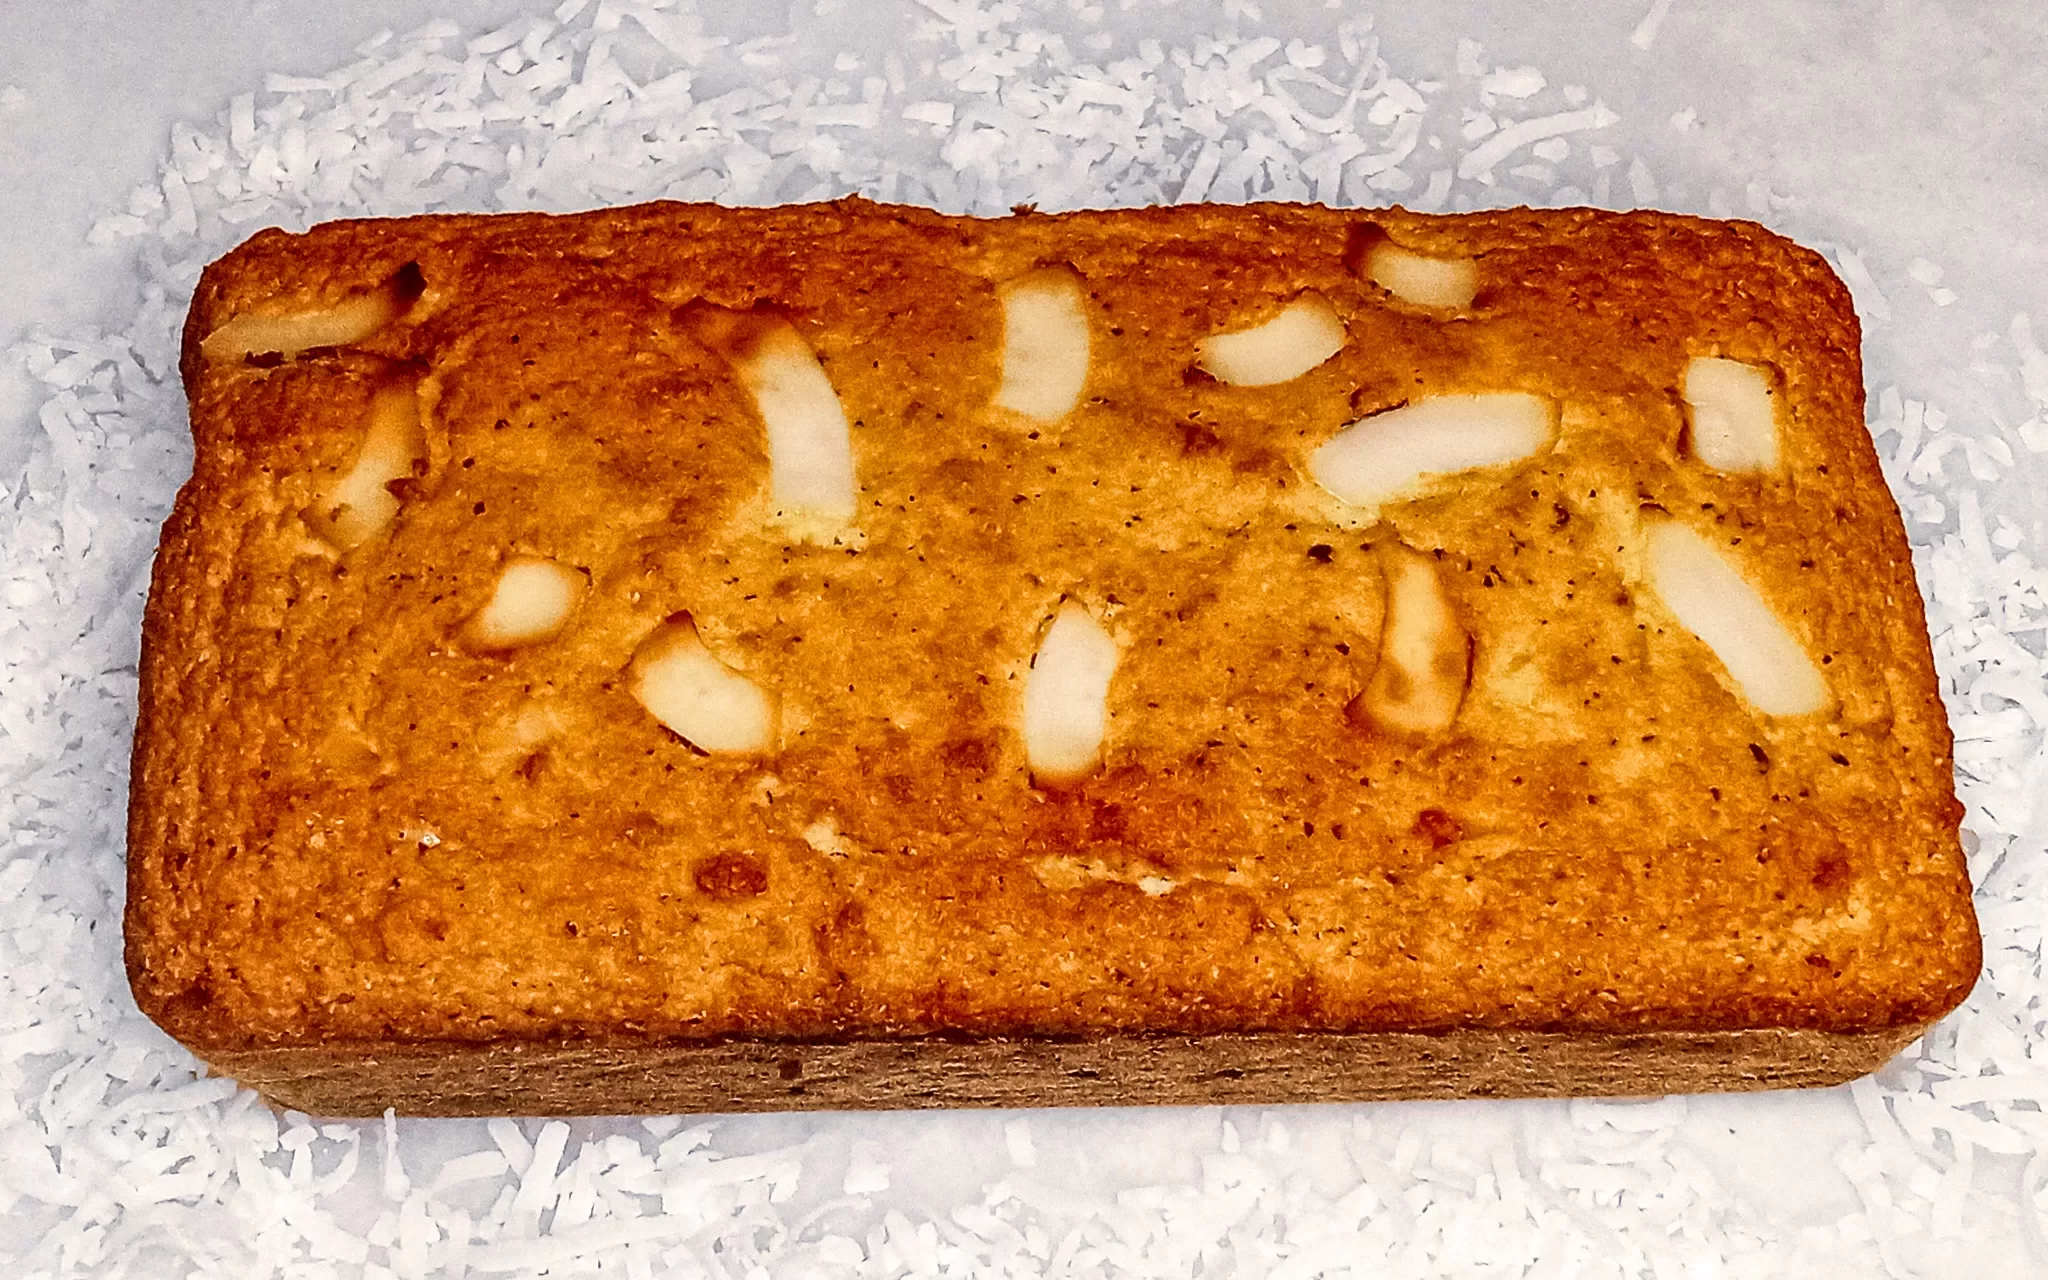 Jelly Coconut Bread with shredded coconut